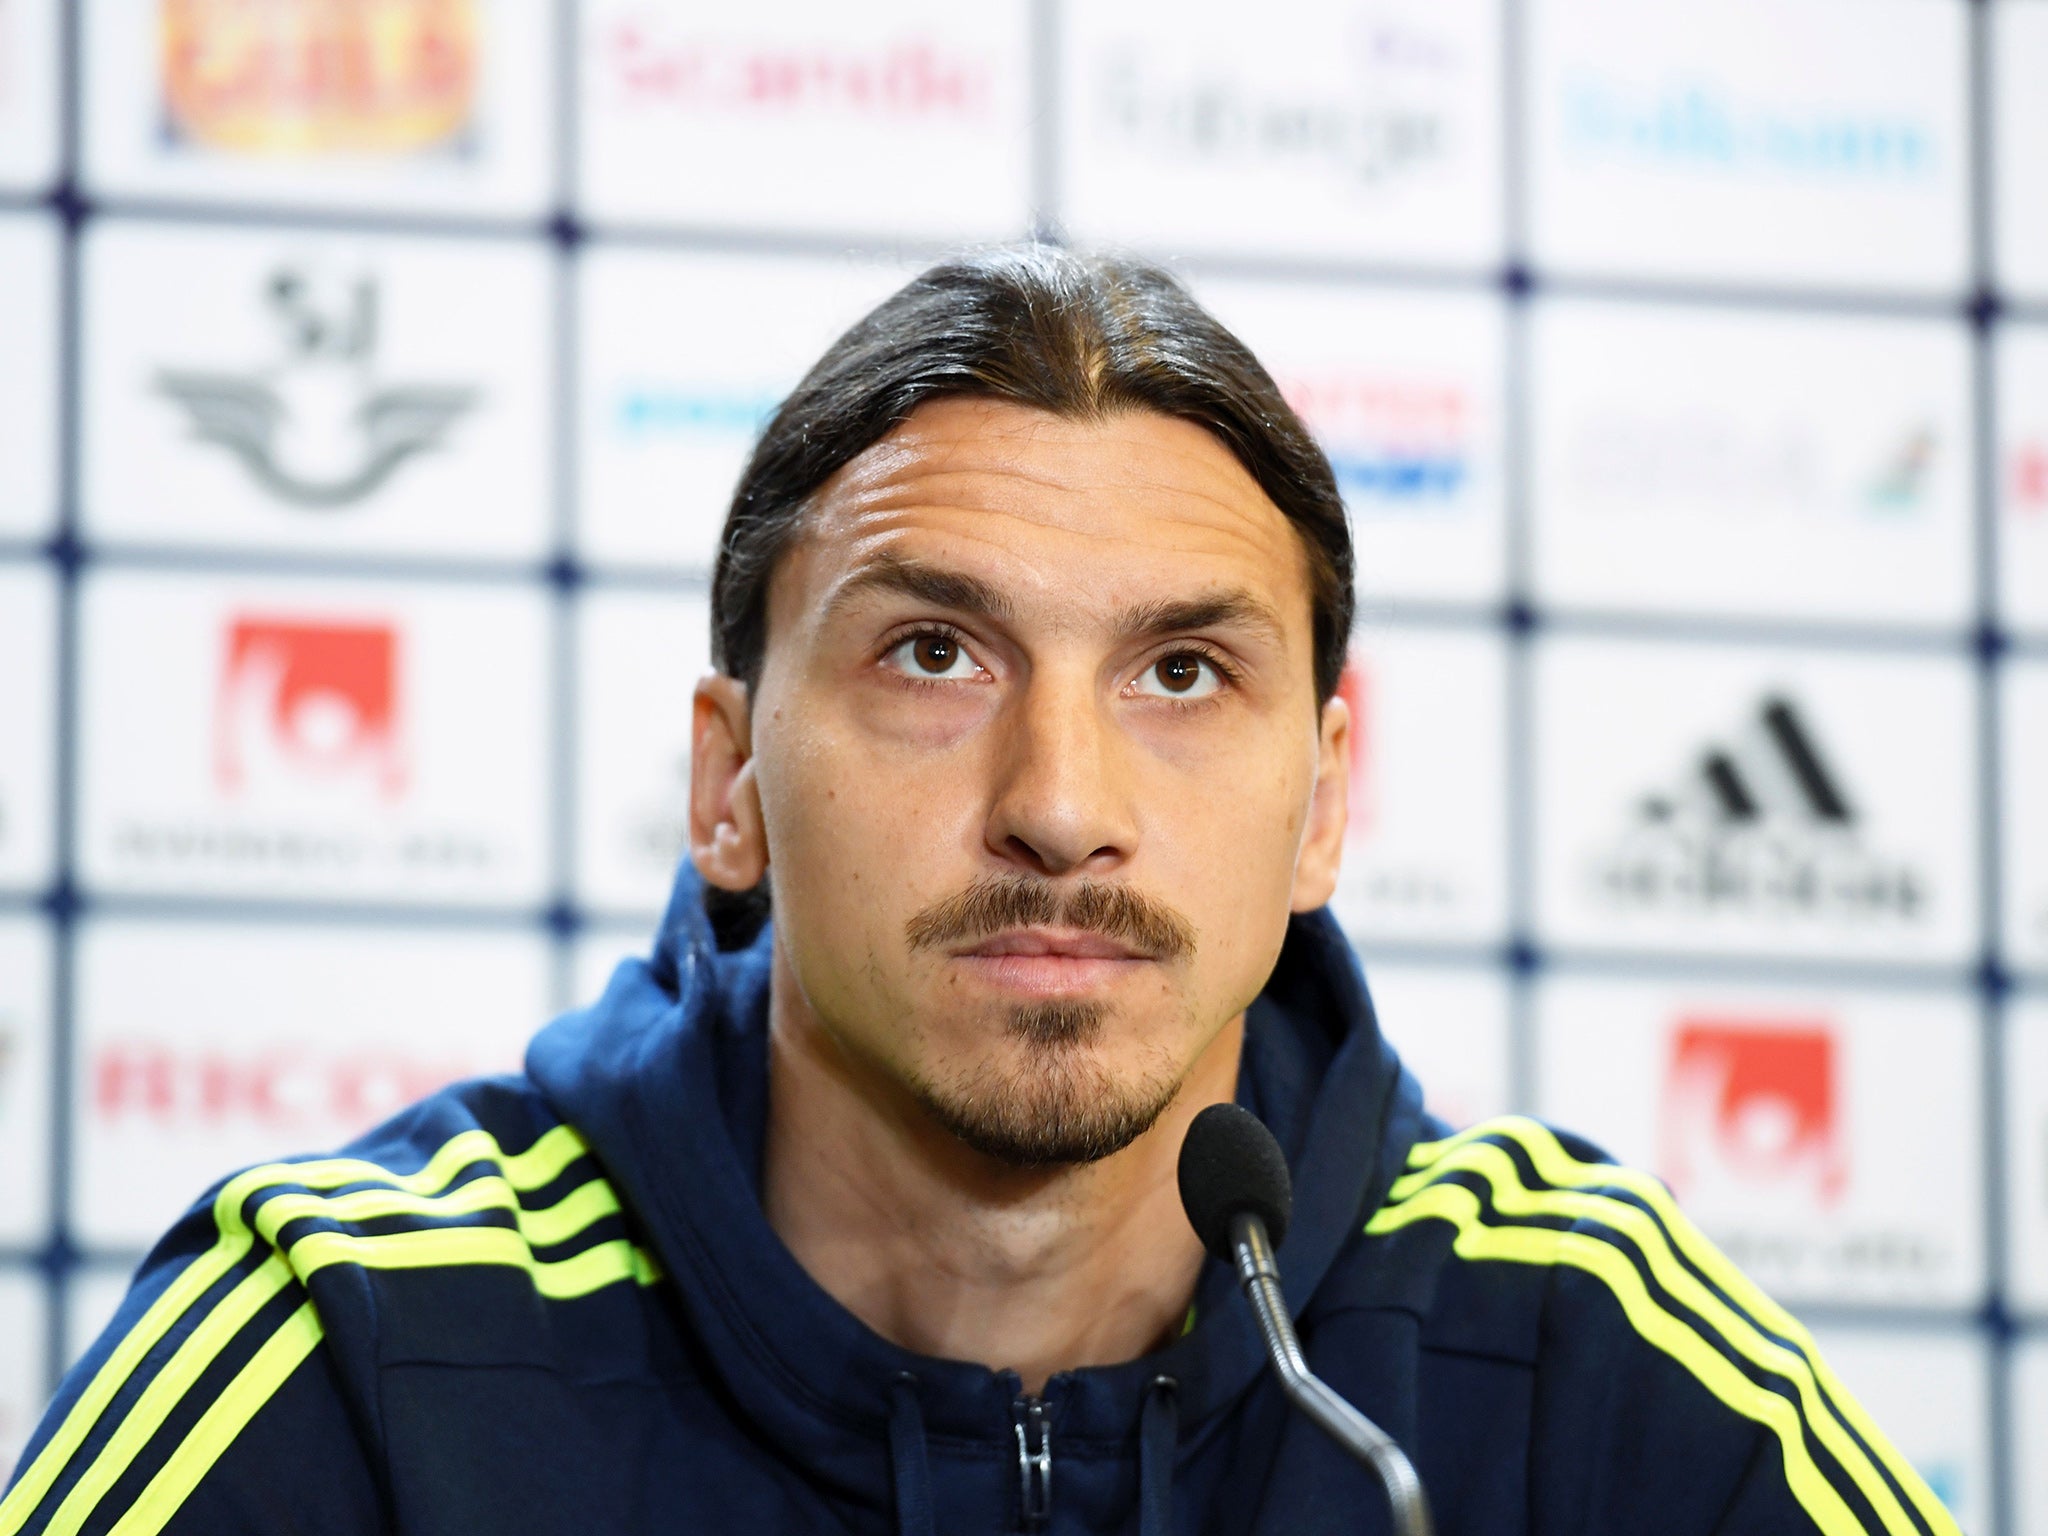 Ibrahimovic previously worked under Mourinho at Internazionale